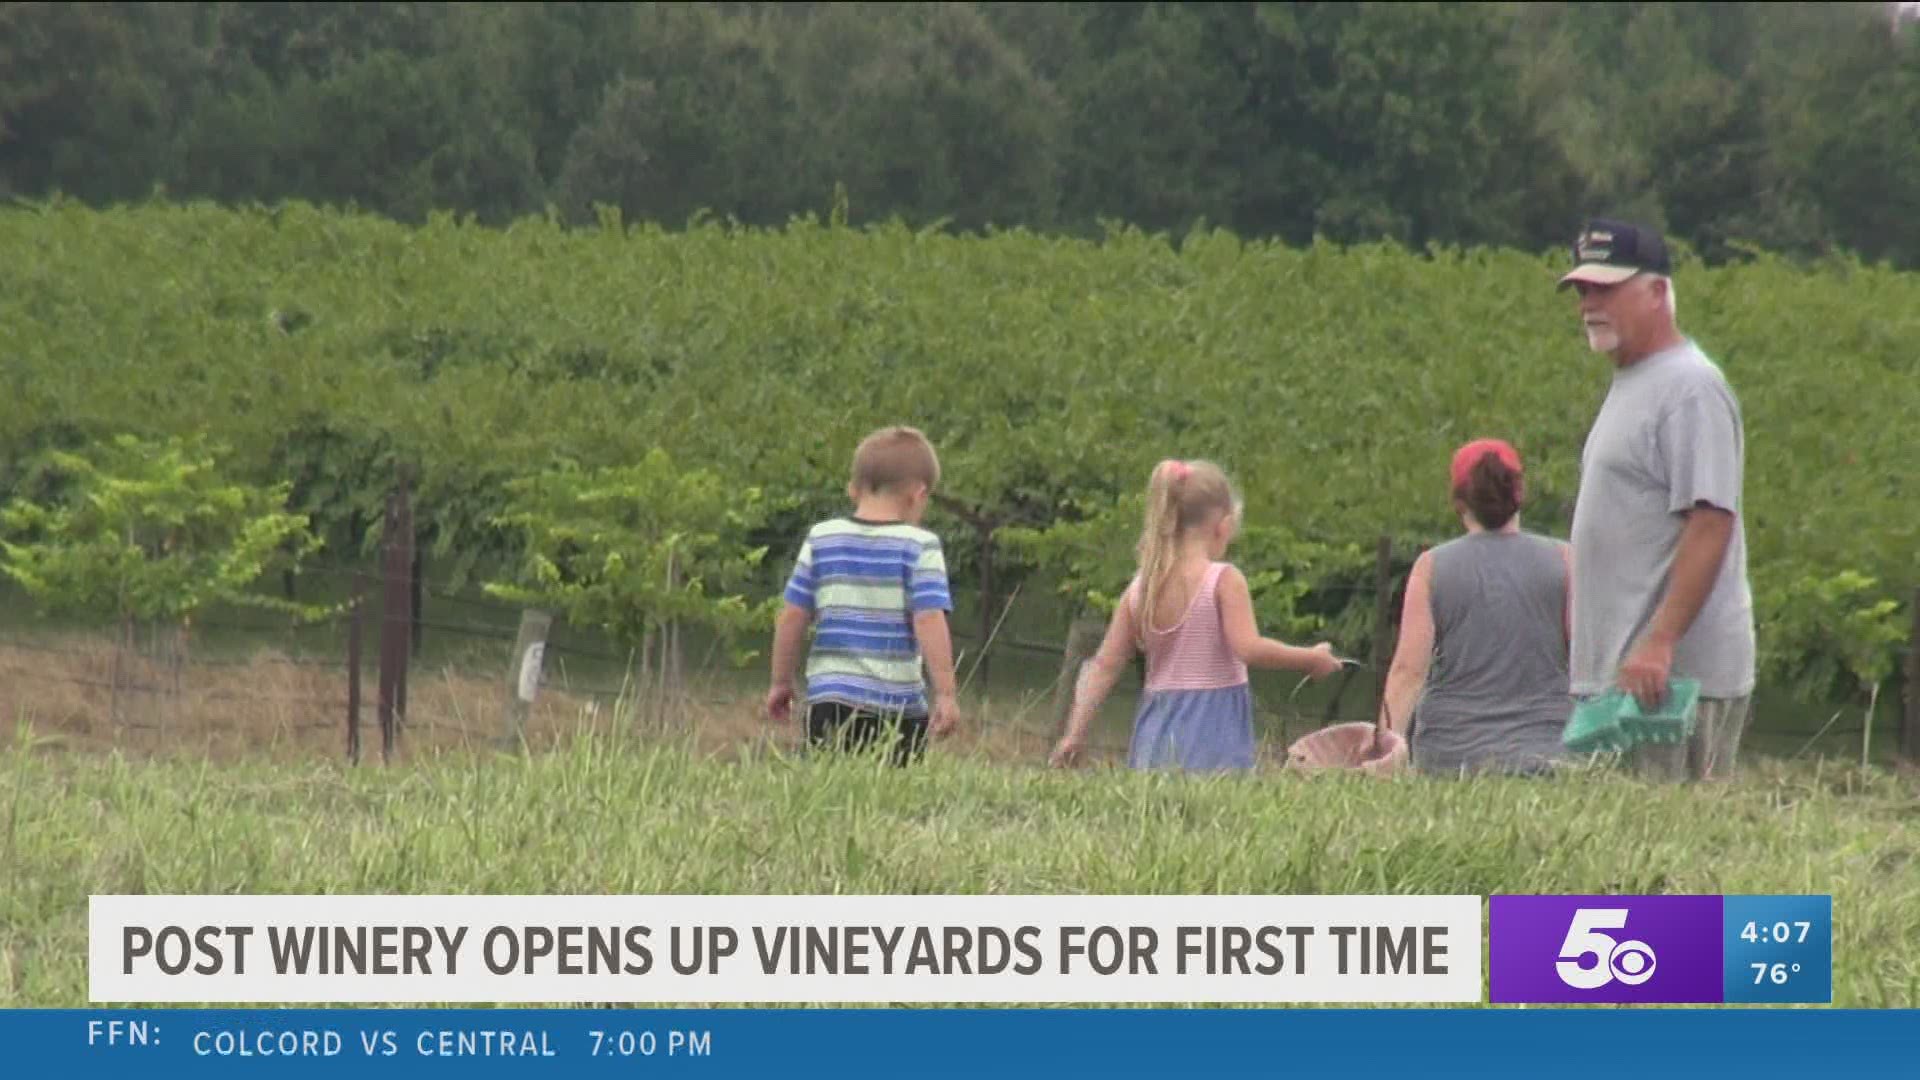 Post winery opens up vineyards for first time.